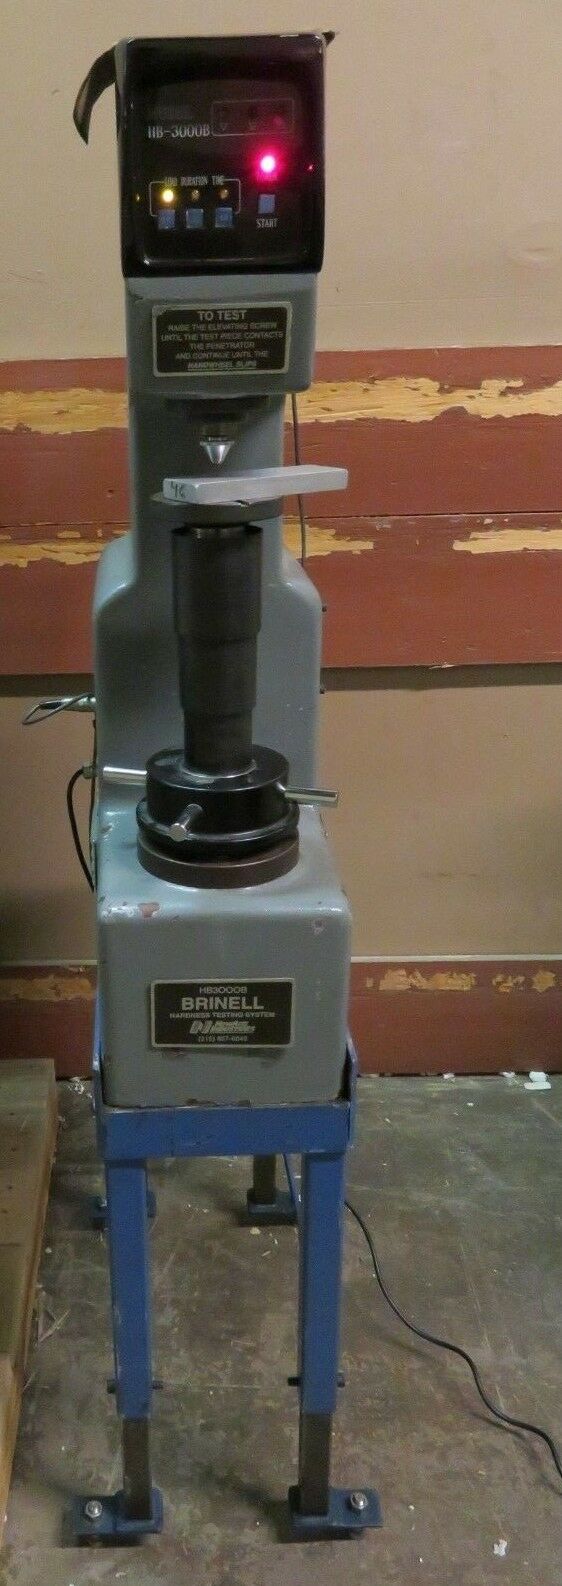 Newage mdl 3000 Brinell Hardness Tester - Working, Tested